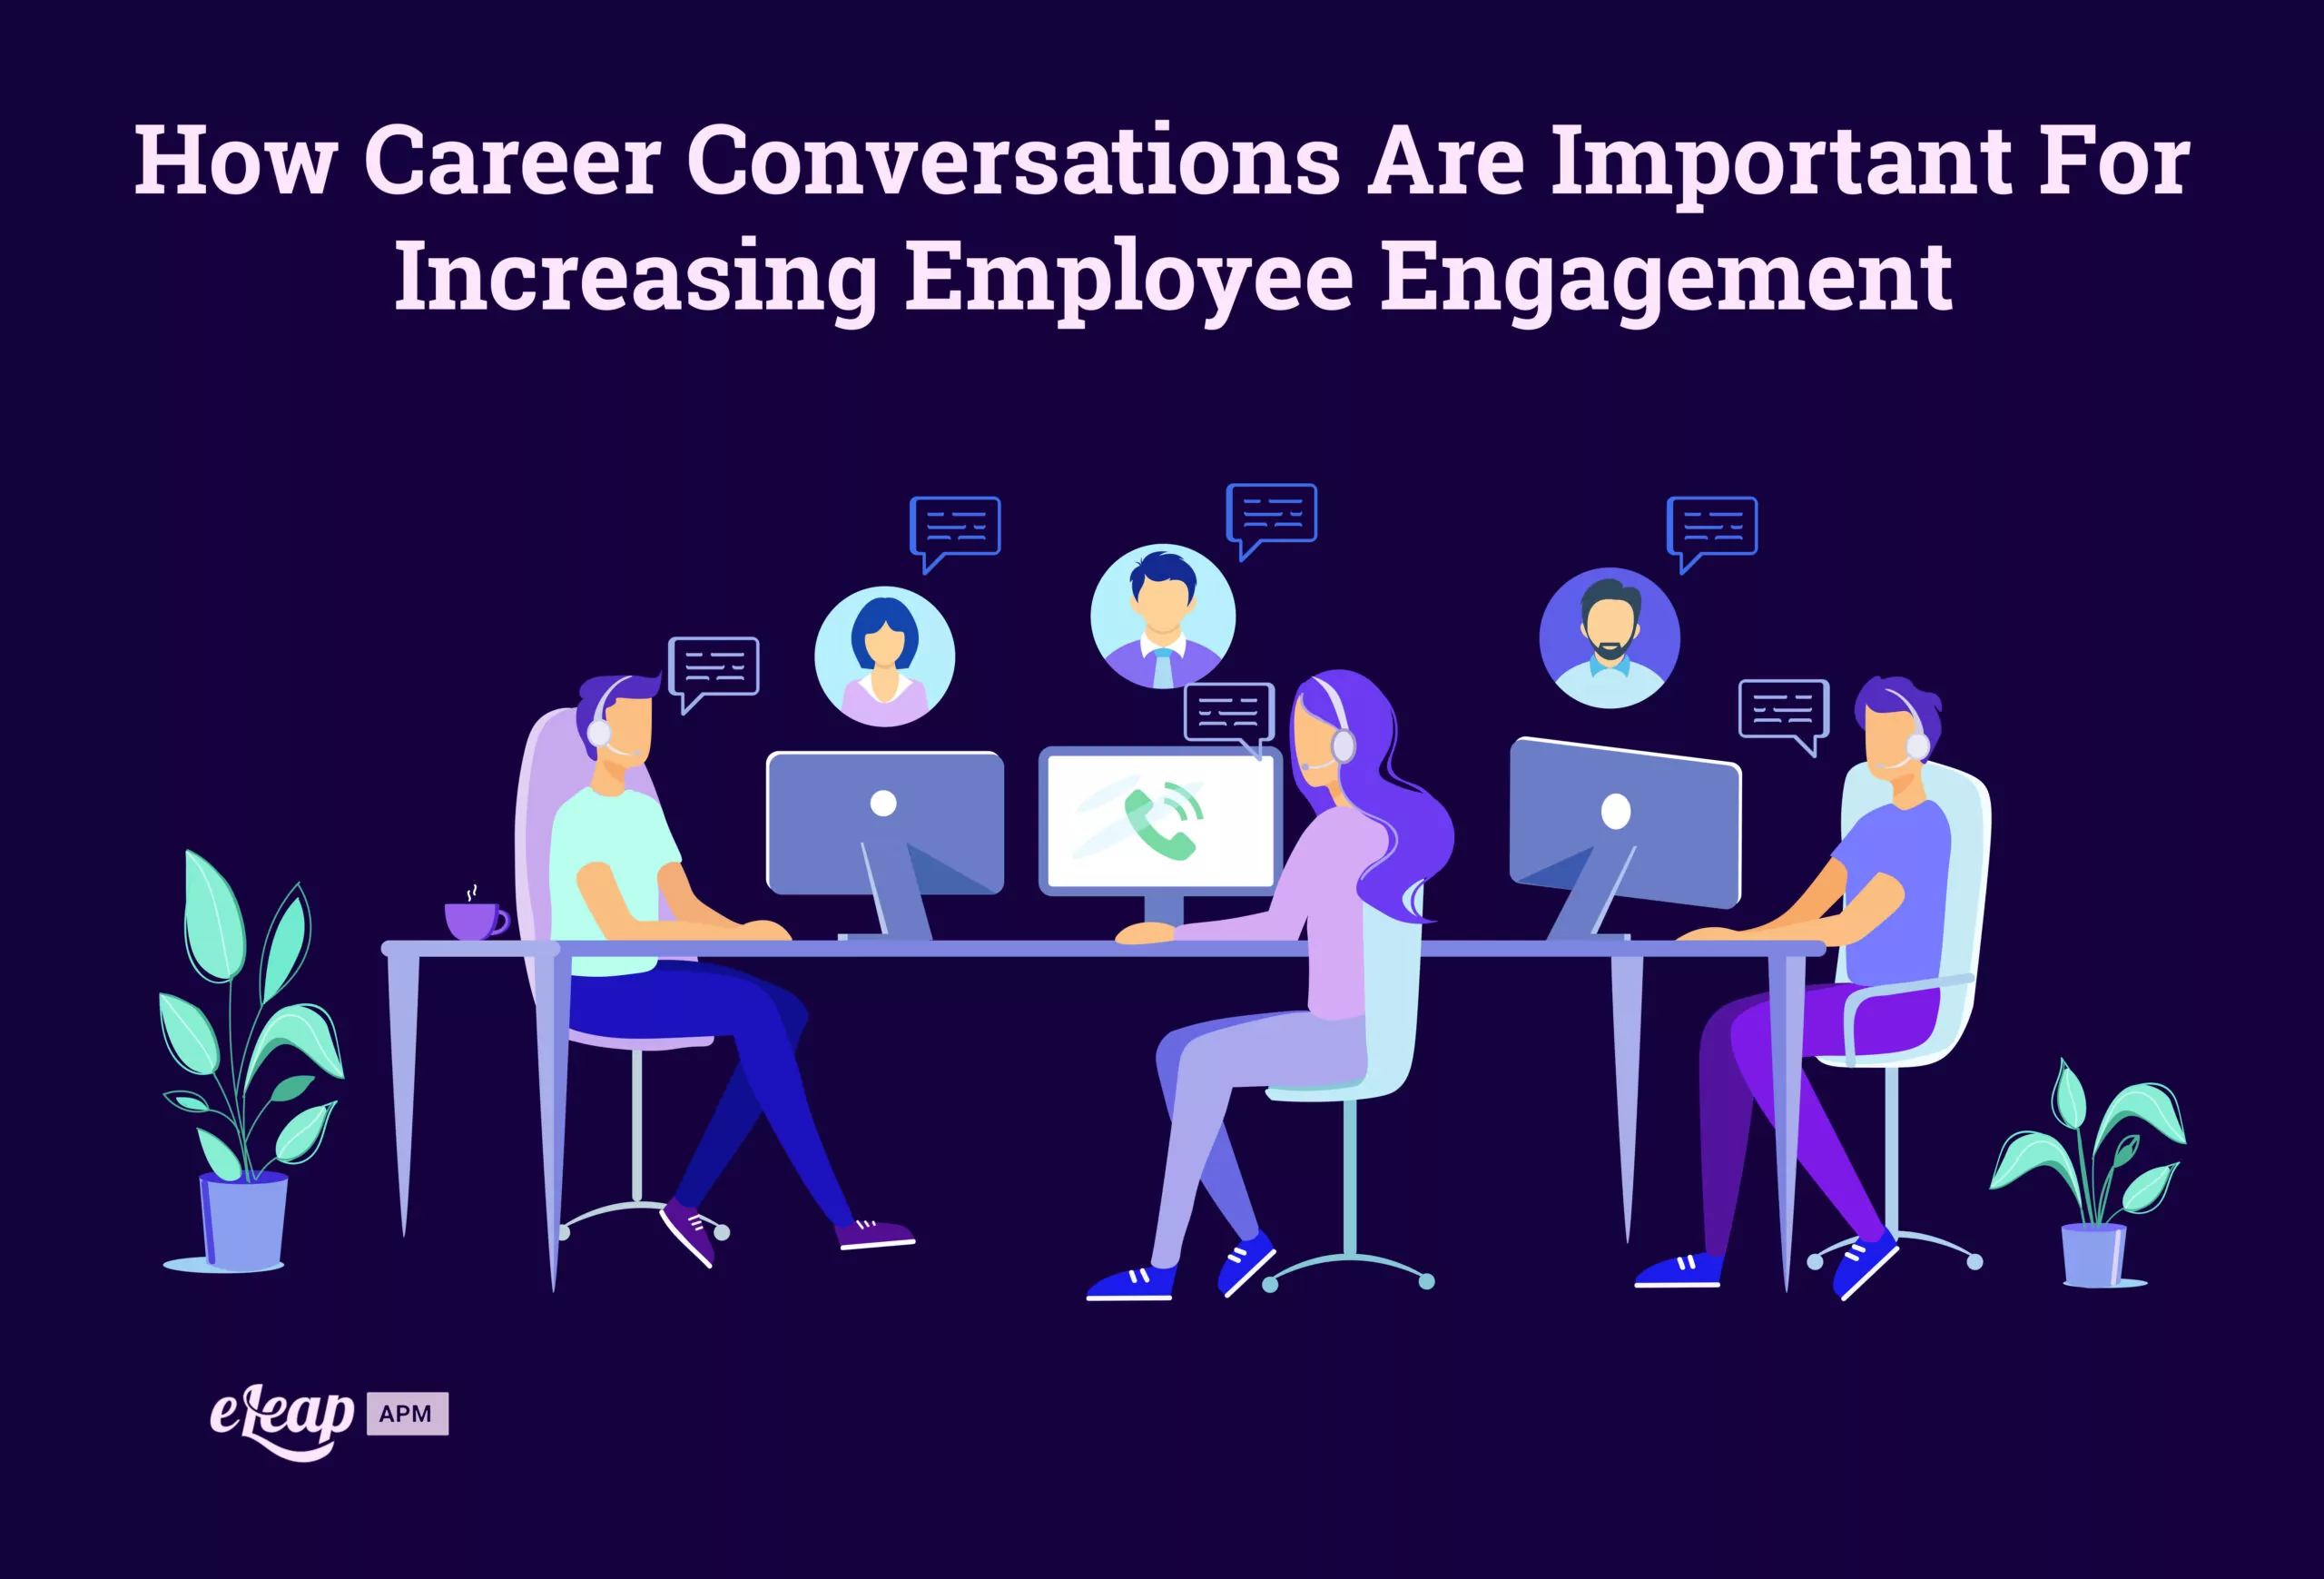 How Career Conversations Are Important For Increasing Employee Engagement